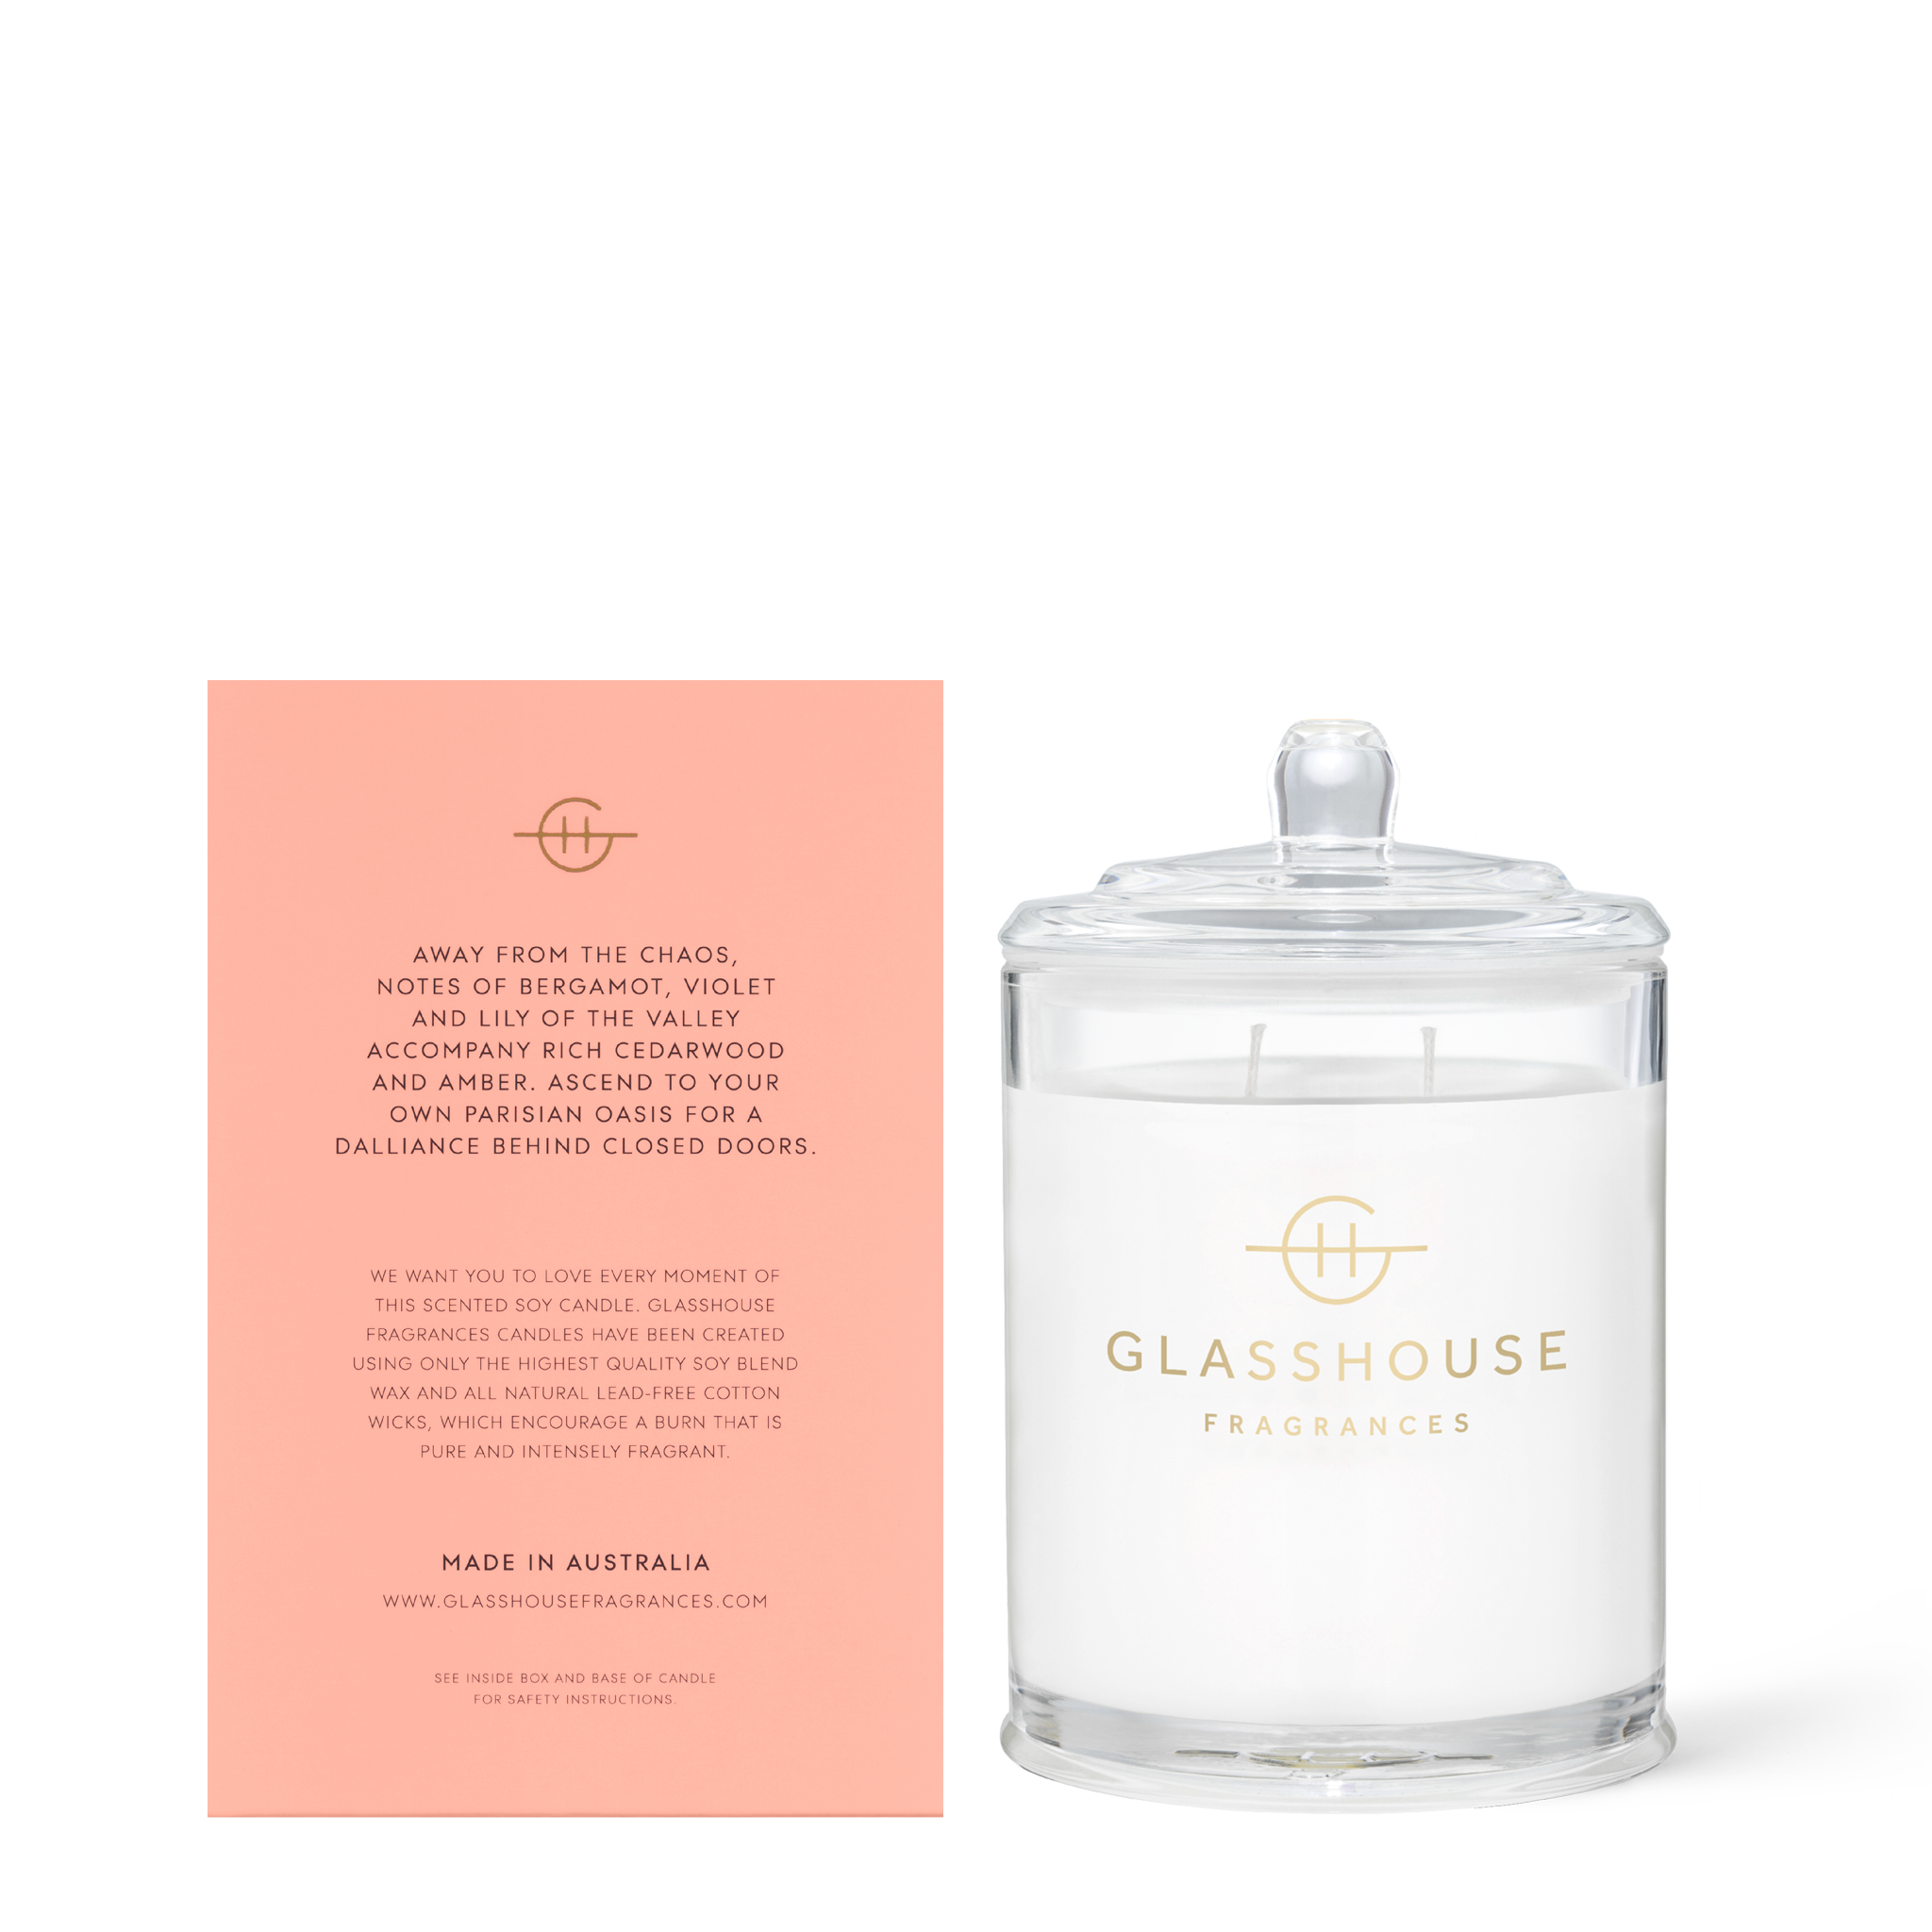 Glasshouse Fragrances A Place in Paris Cedarwood Bergamot 380g Soy Candle with box - Back of the product shot